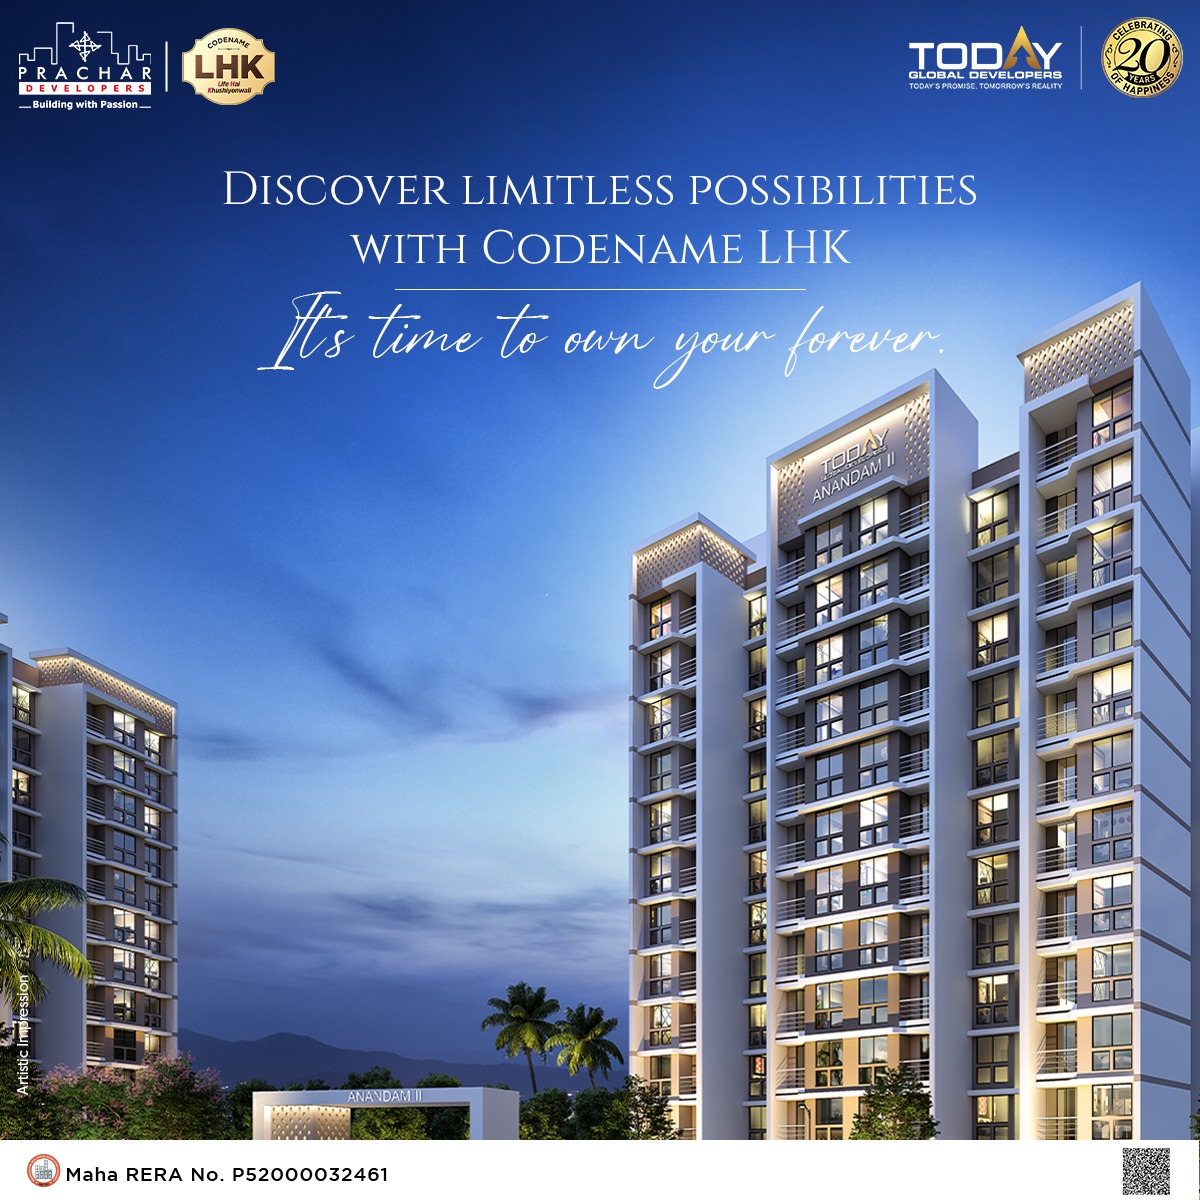 Life at Codename Life Hai Khushiyon Wali (LHK) is all about happiness and cherished moments. Own your forever in a community filled with love, laughter, and togetherness.

#TodayGlobalDevelopers  #LifeHaiKhushiyonWali #FamilyMoments #RealEstate #Kharghar #Panvel #NaviMumbai